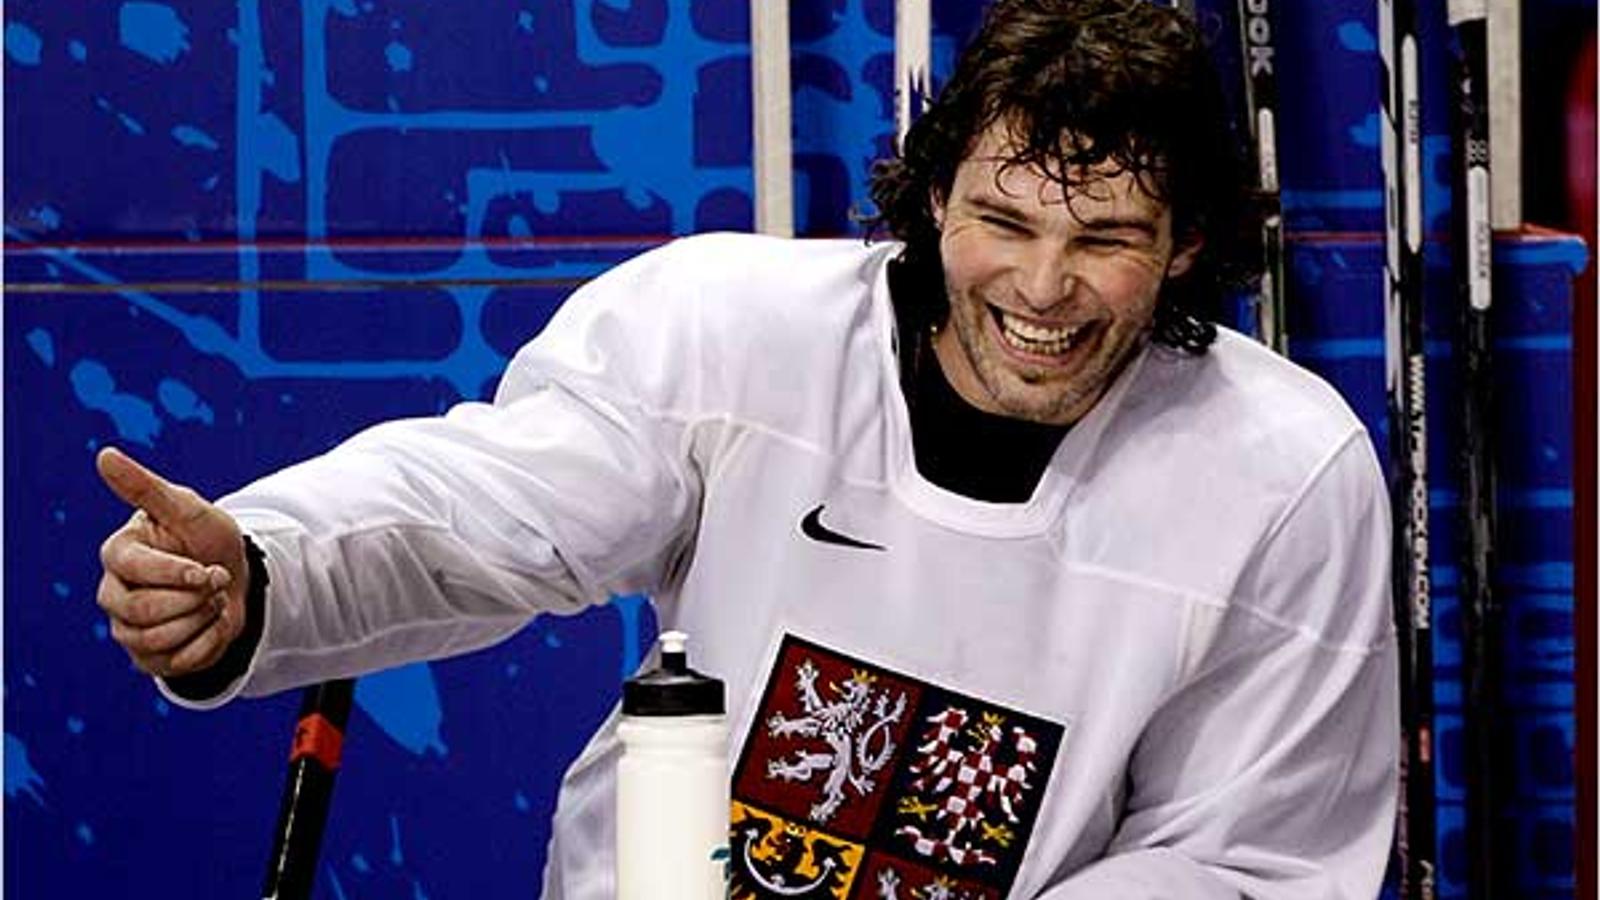 Jaromir Jagr just found out how GIFs work and is having way too much fun with it! 